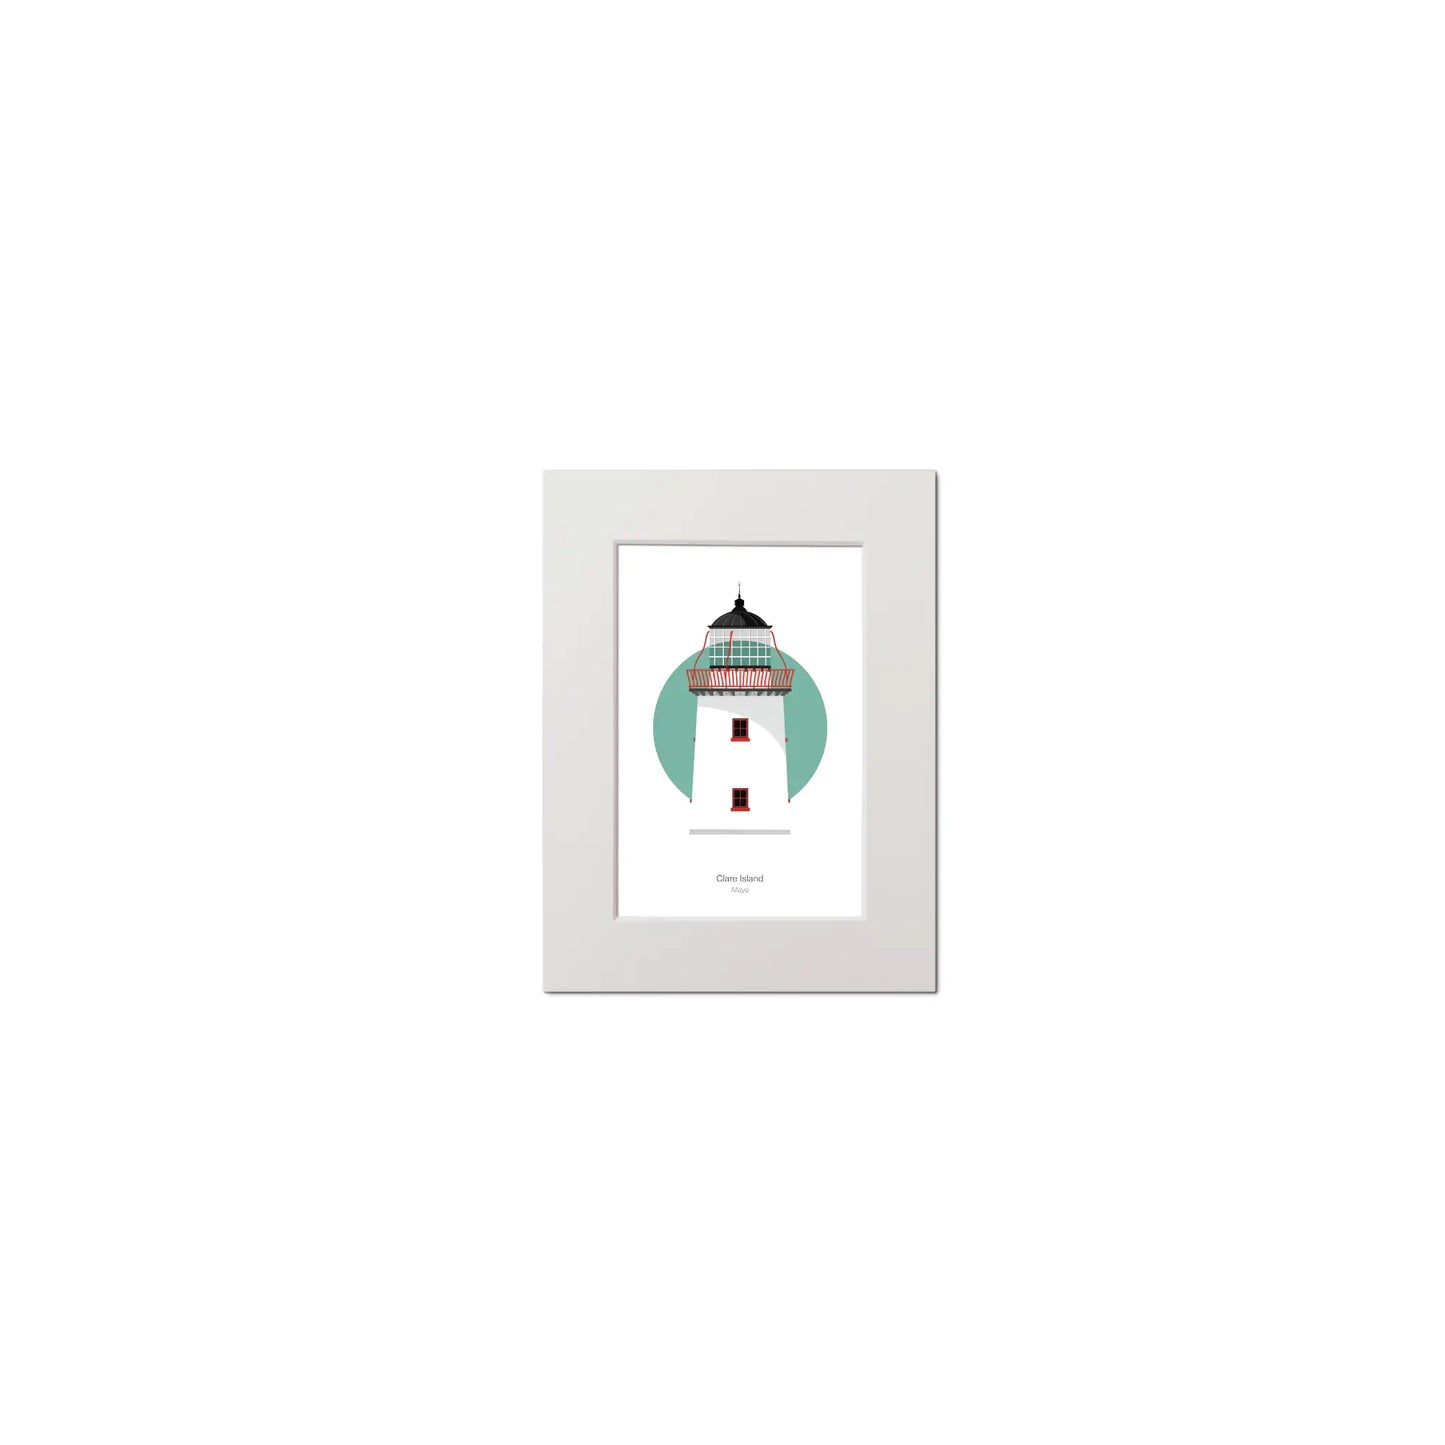 Illustration of Clare Island lighthouse on a white background inside light blue square, mounted and measuring 15x20cm.